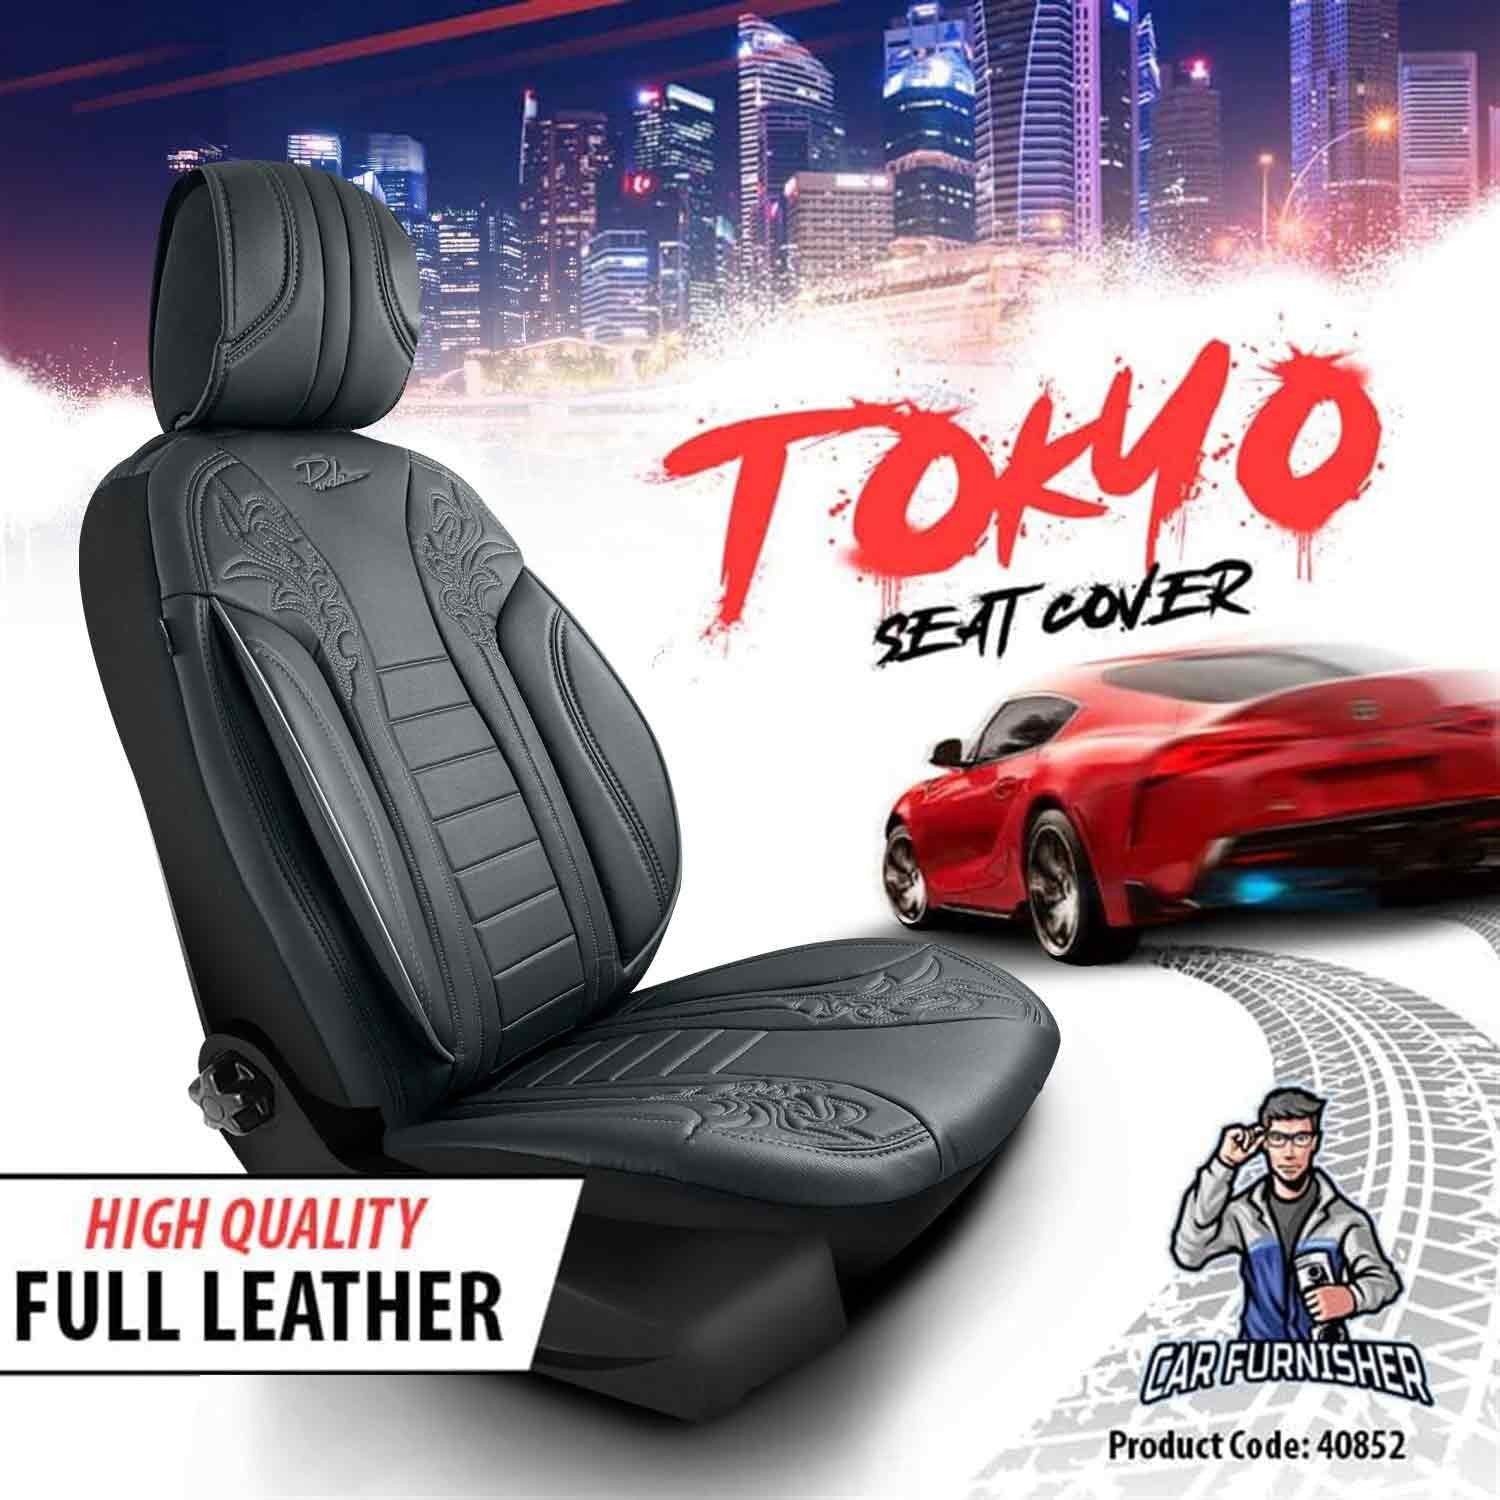 Mercedes 190 Seat Covers Tokyo Design Smoked Black 5 Seats + Headrests (Full Set) Full Leather